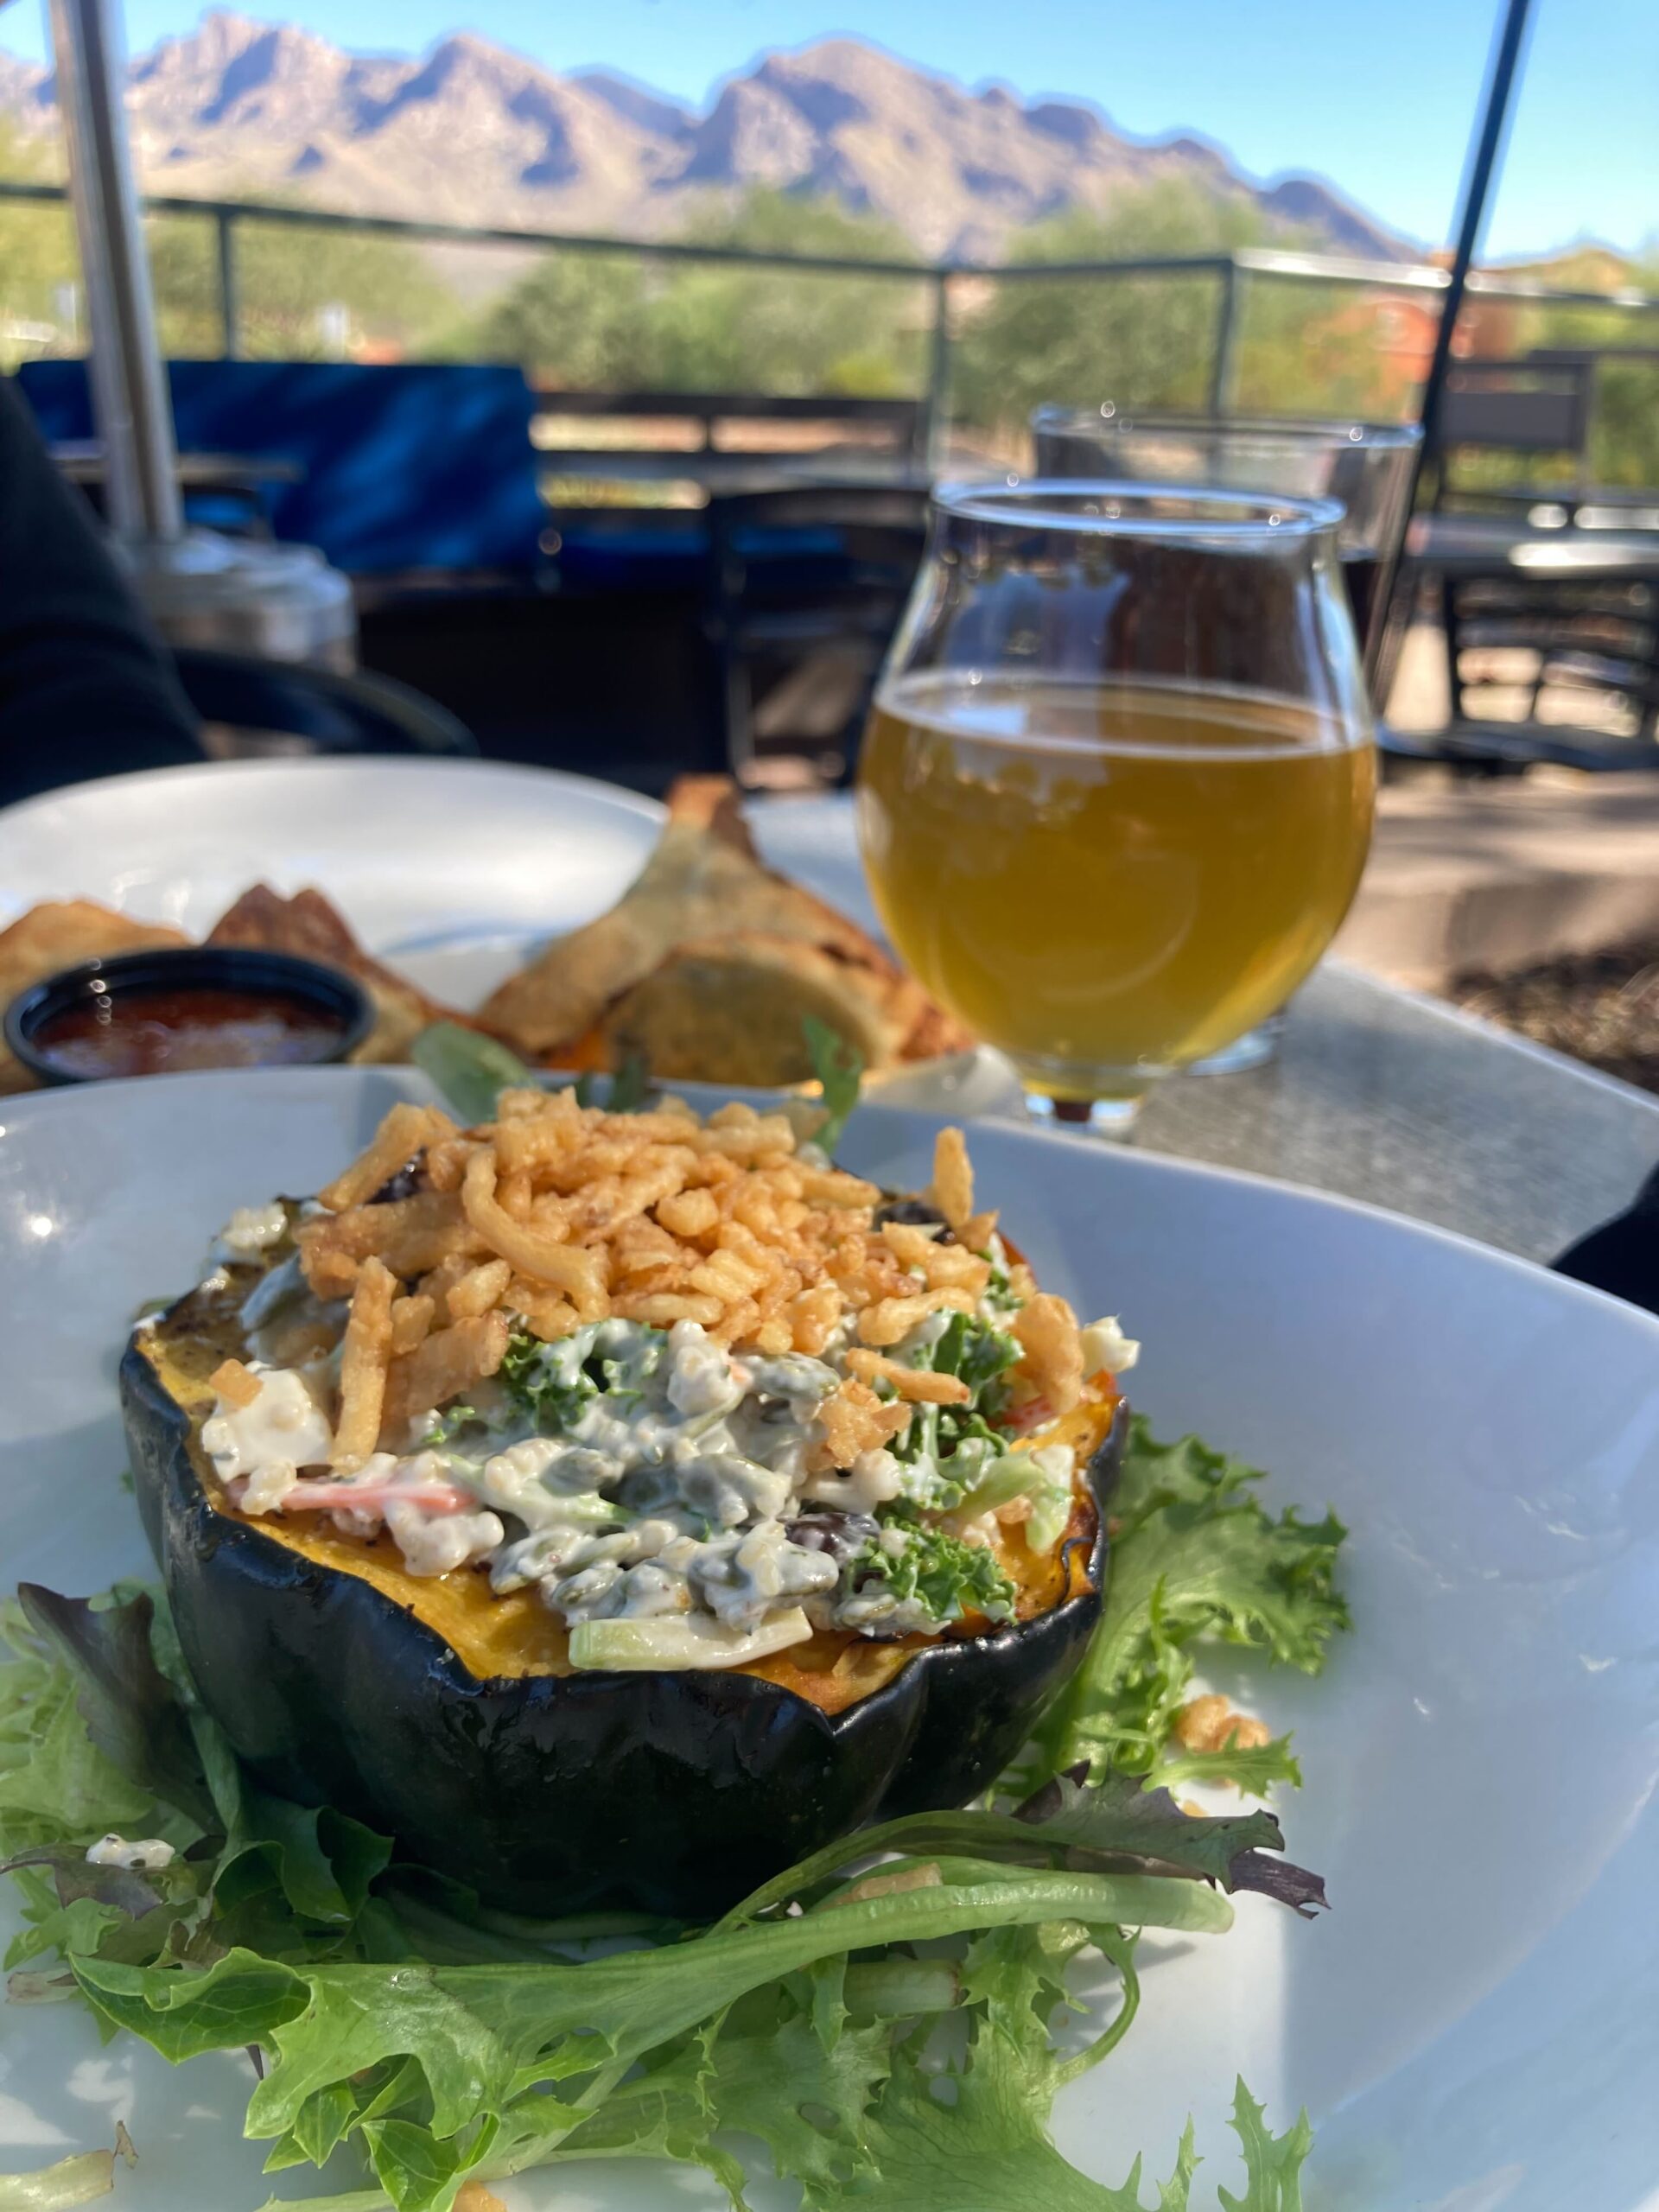 Stuffed Squash from Noble Hops